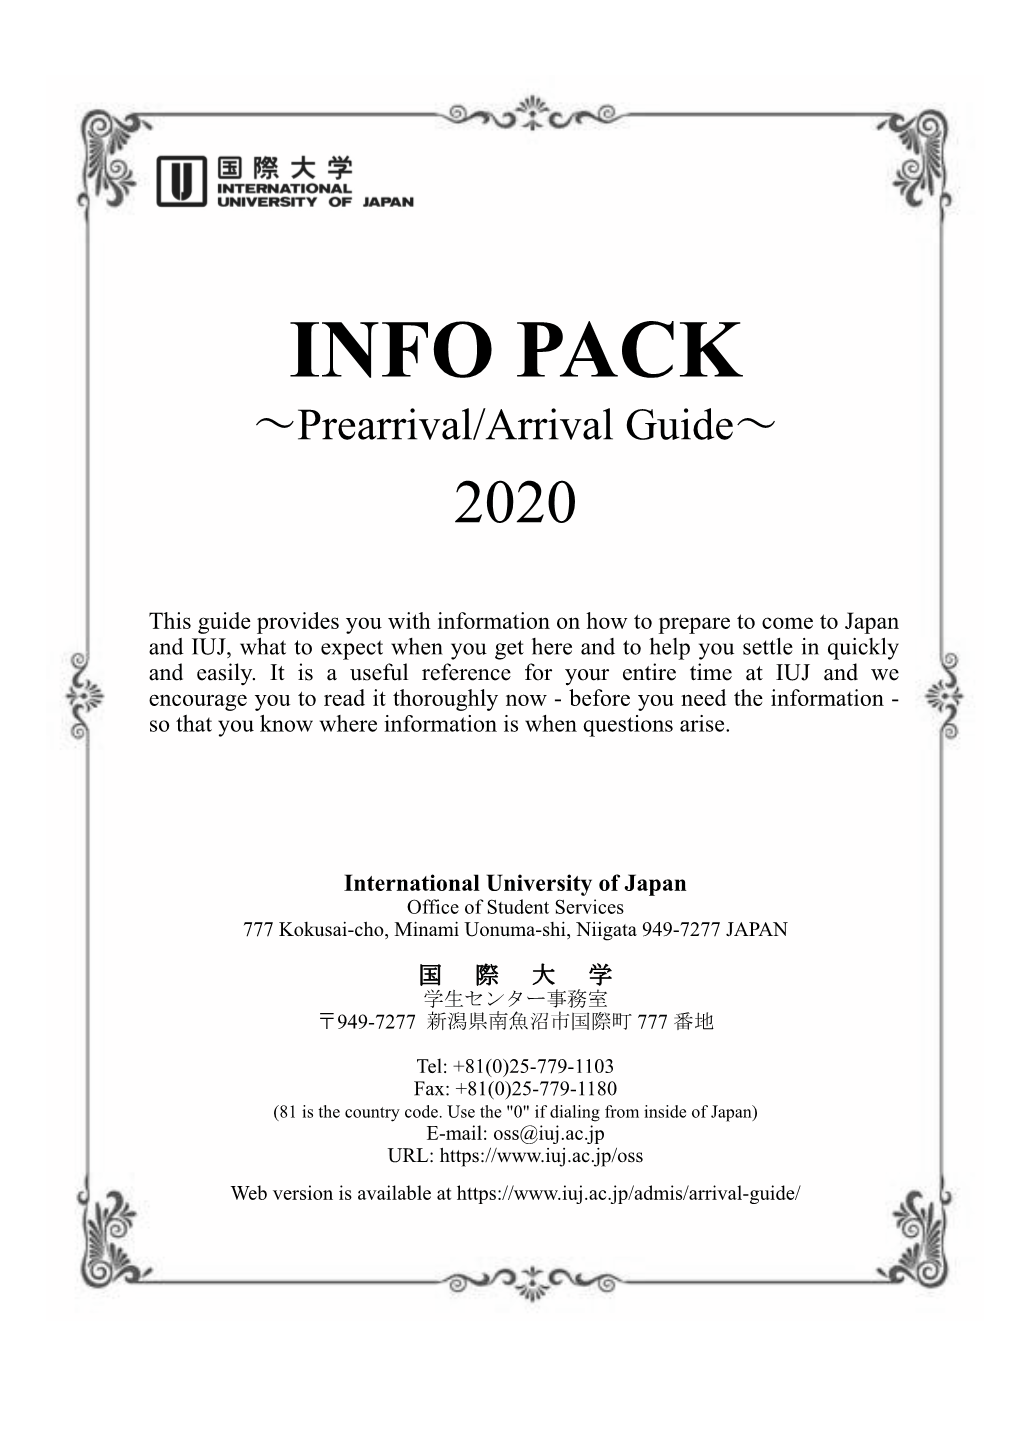 INFO PACK ～Prearrival/Arrival Guide～ 2020